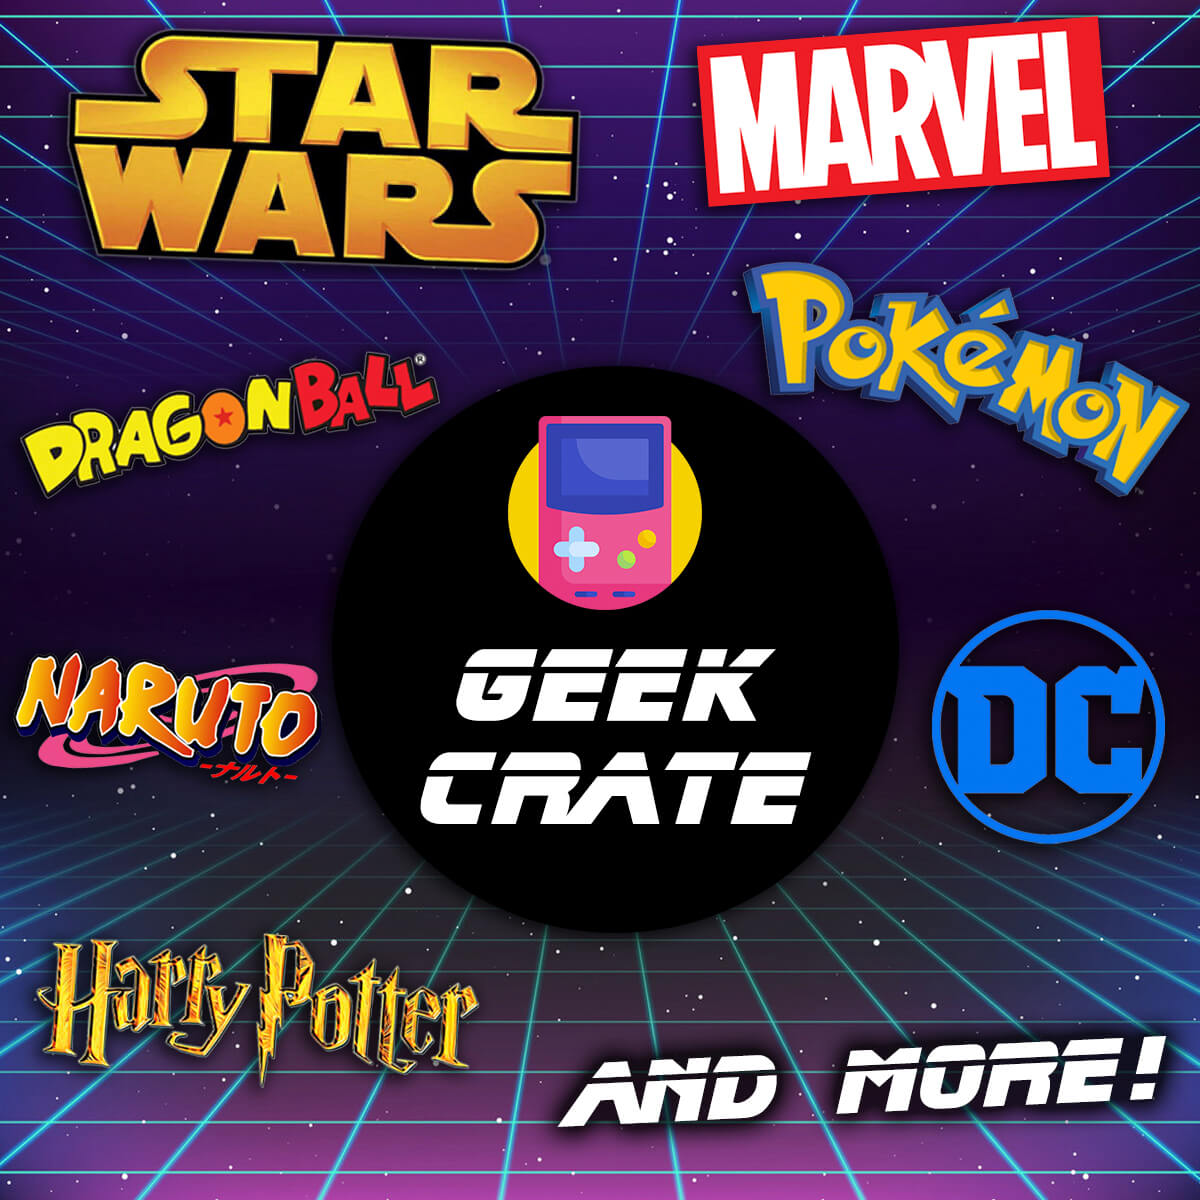 Geek Crate Subscription Box